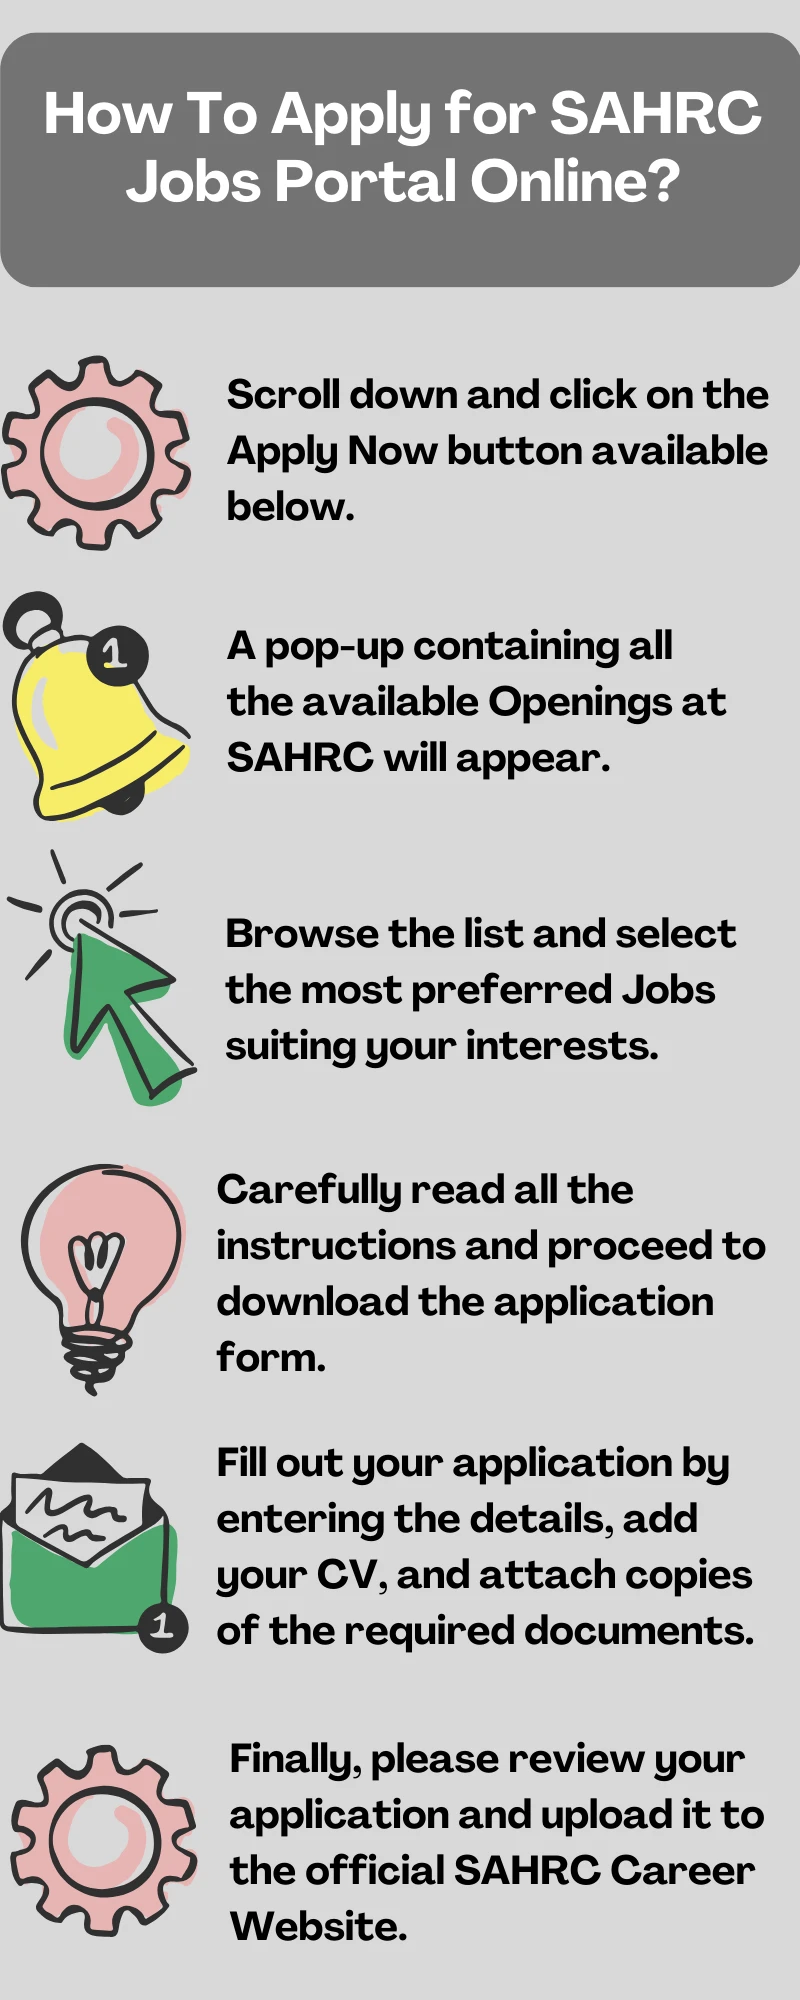 How To Apply for SAHRC Jobs Portal Online?